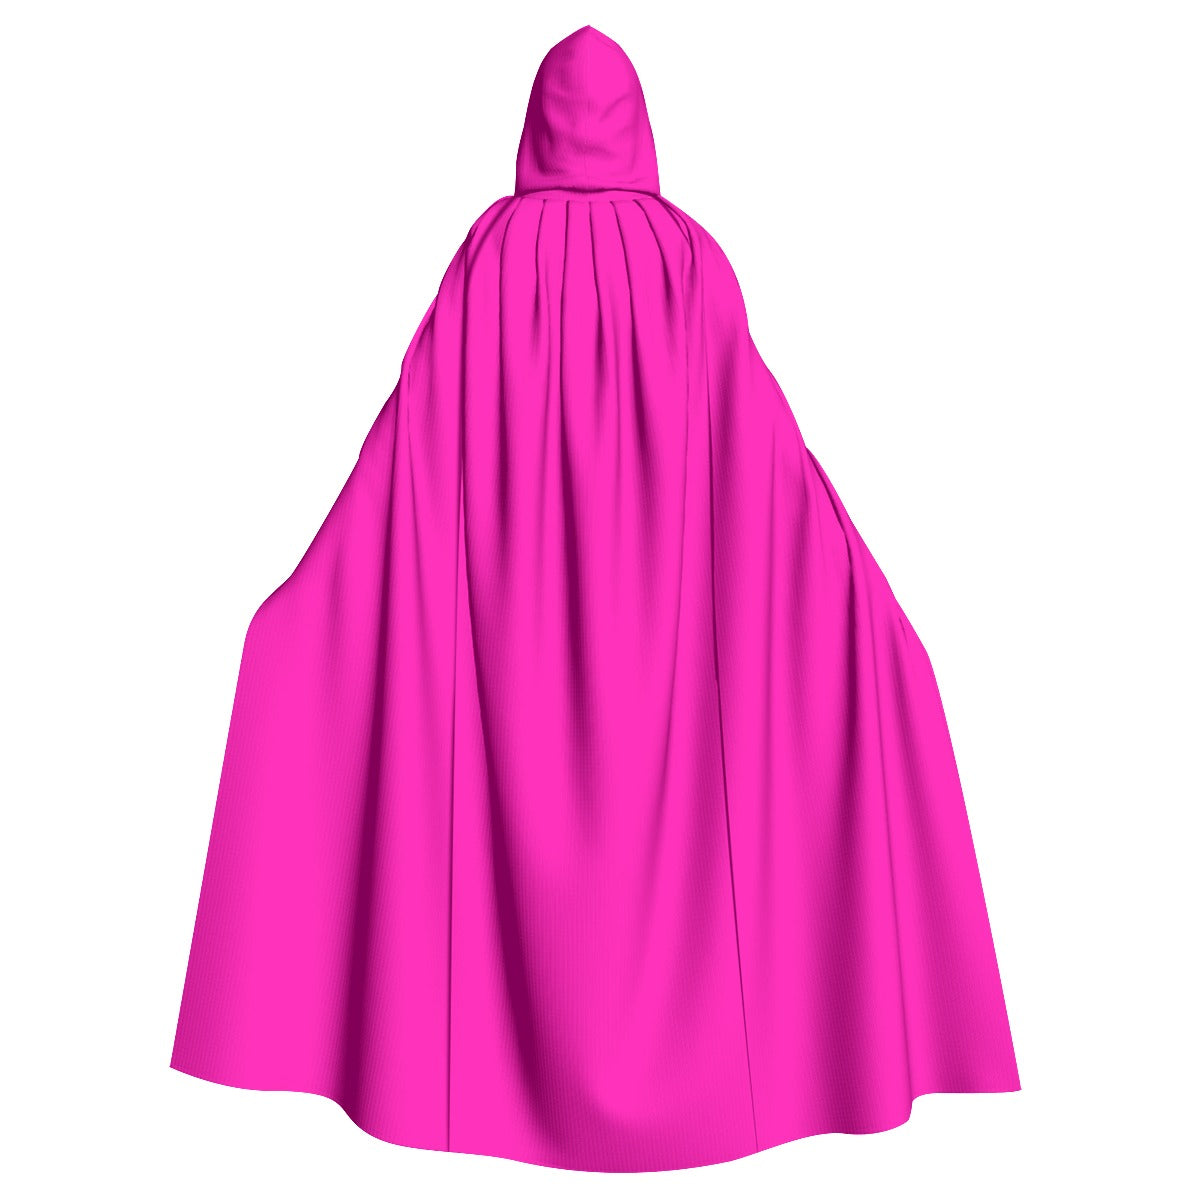 TGC FASHION Hot Pink Cape  Avantgarde Outfit in Microfiber